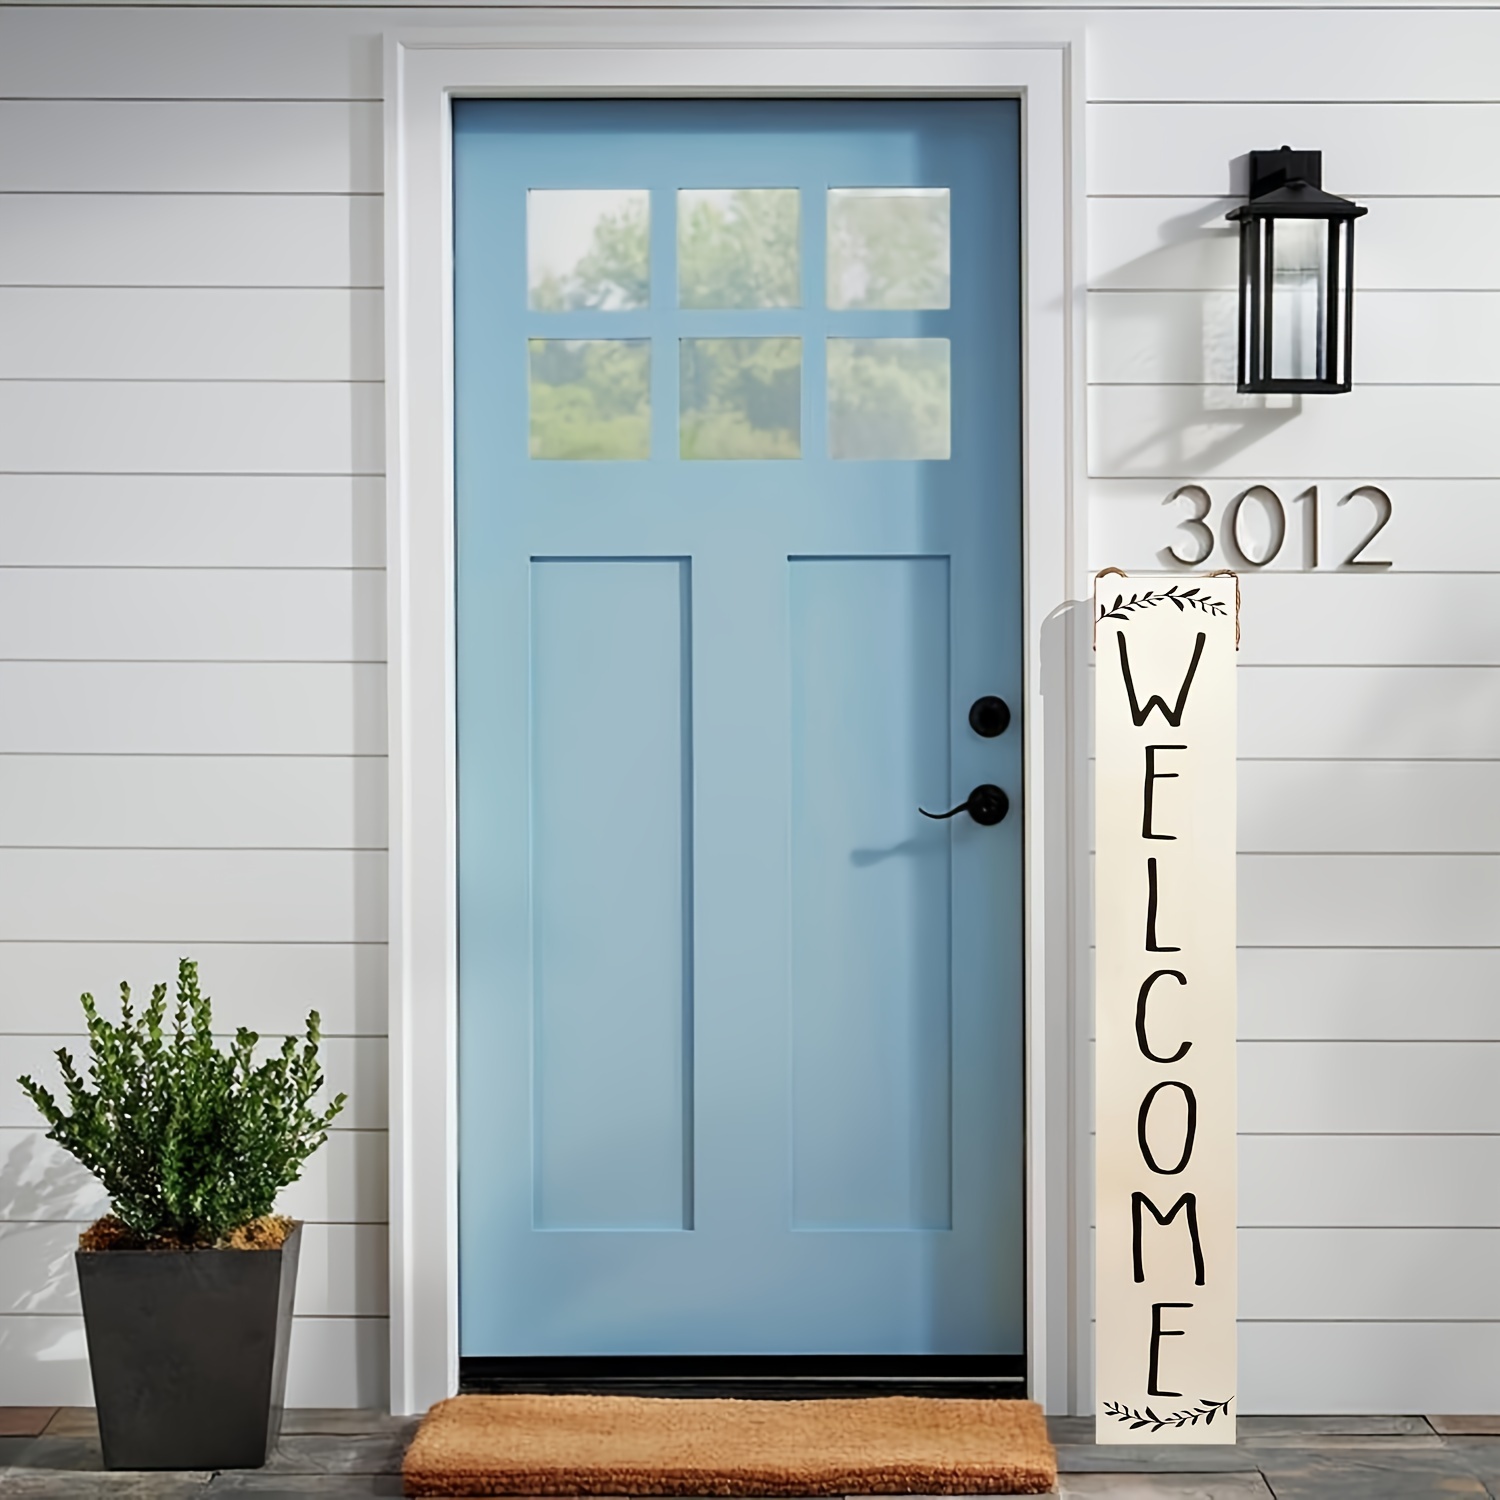 Welcome to Our Home Porch Leaner Sign, Front Door Sign